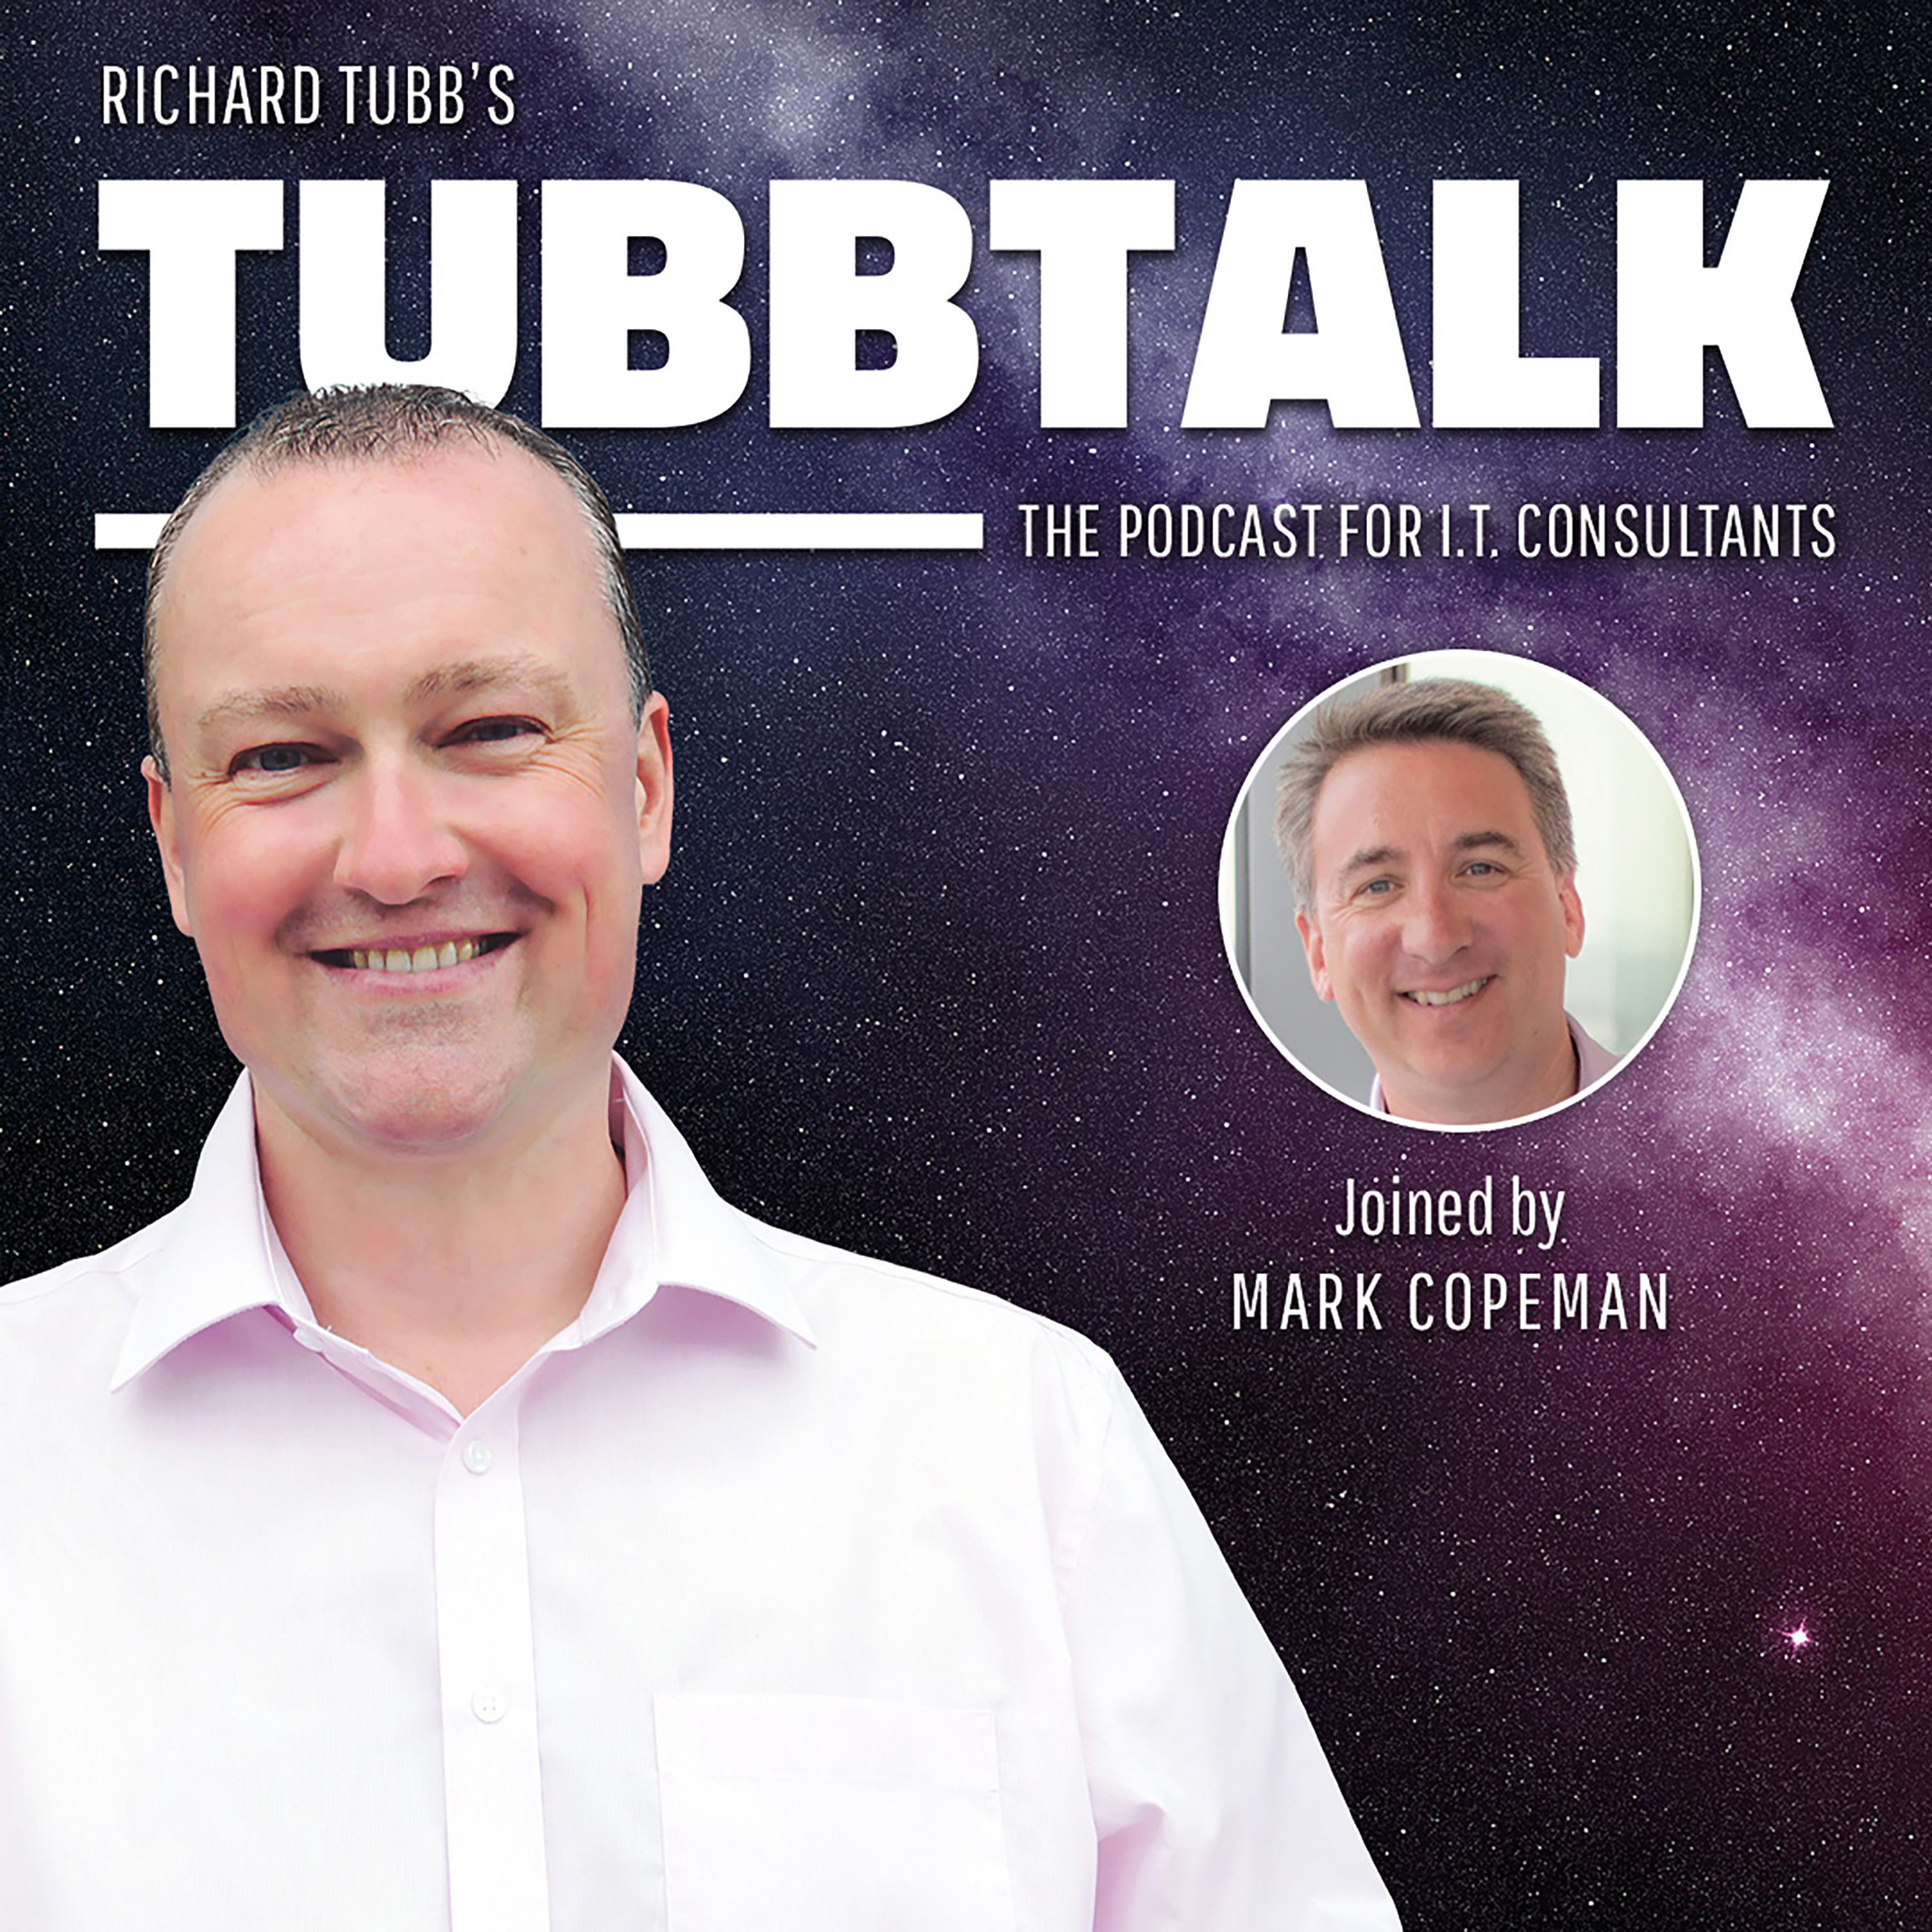 Artwork for podcast TubbTalk - The Podcast for IT Consultants